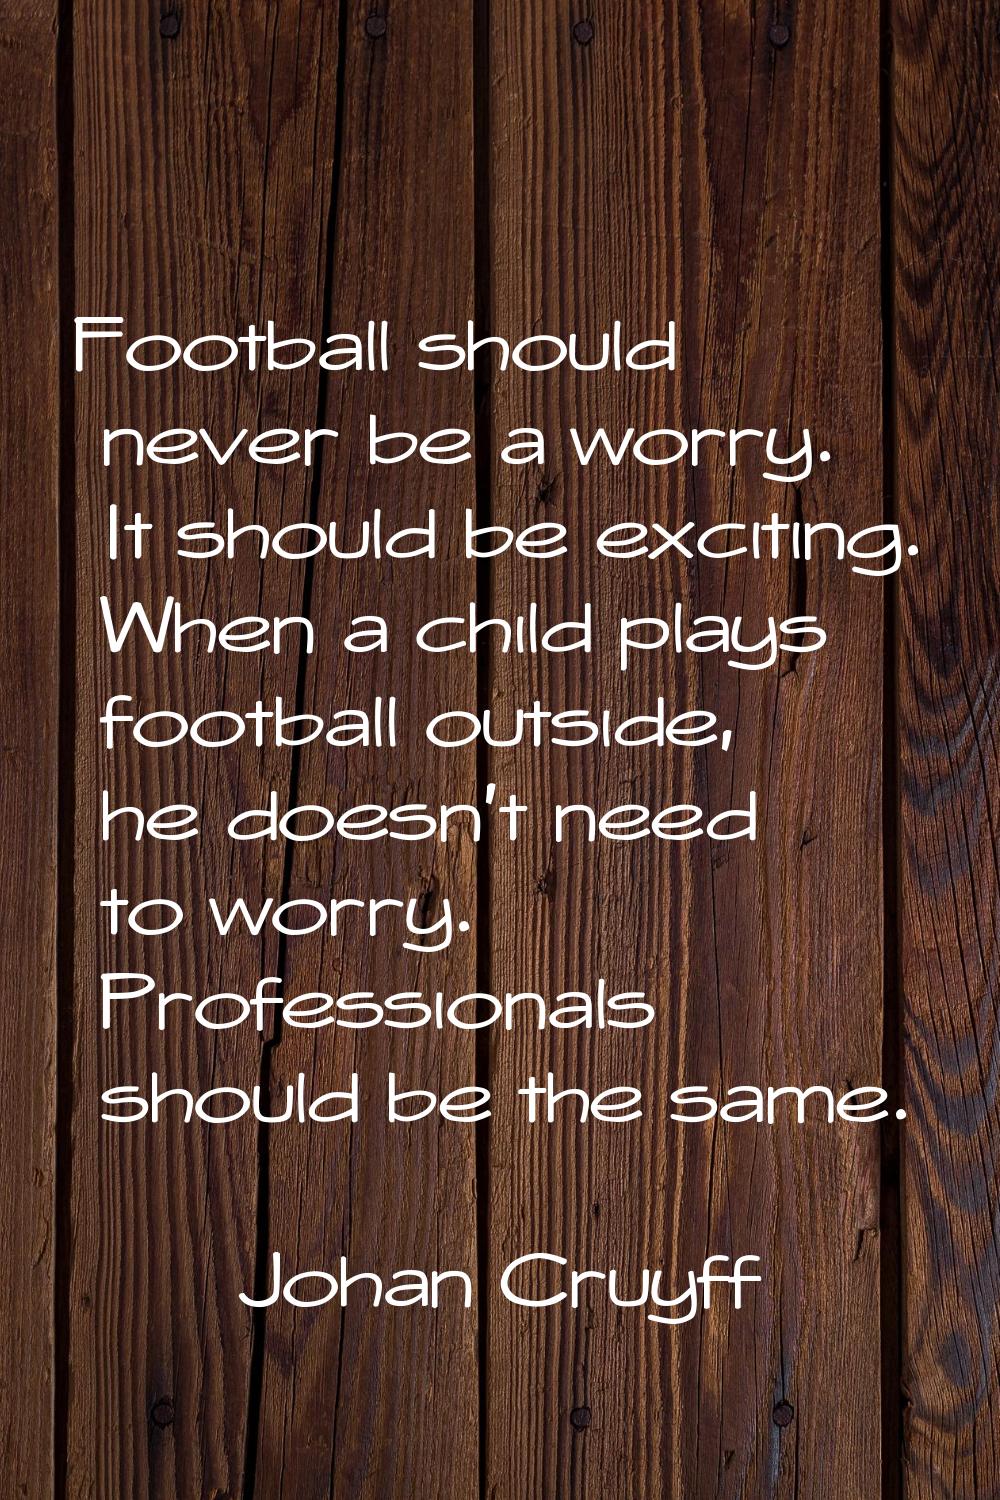 Football should never be a worry. It should be exciting. When a child plays football outside, he do